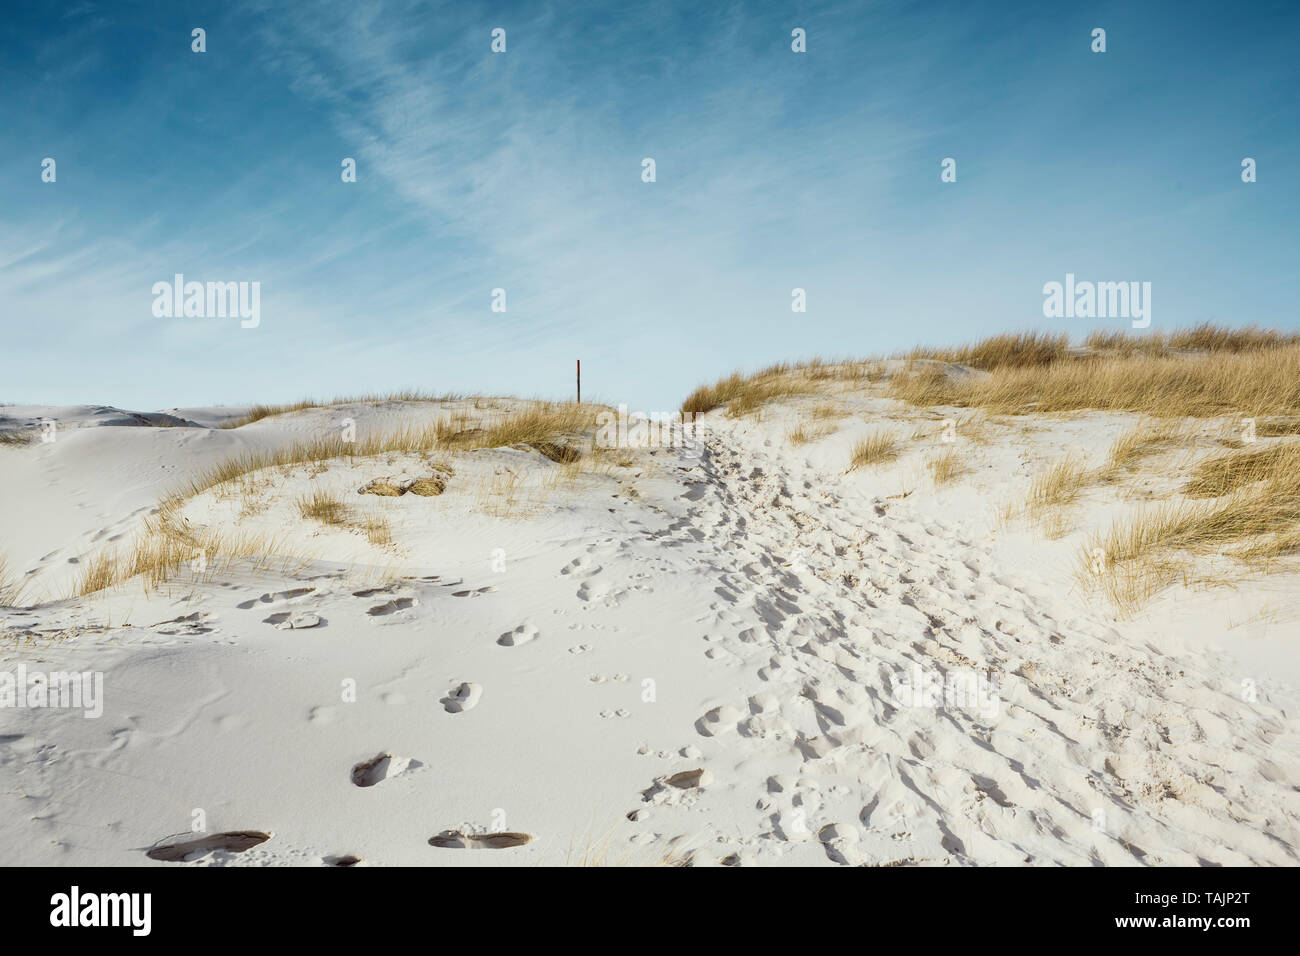 Pathway leading to the sea through dunes with marram grass and footprints in the sand under a sunny blue sky. Idyllic coastal landscape in Amrum in th Stock Photo